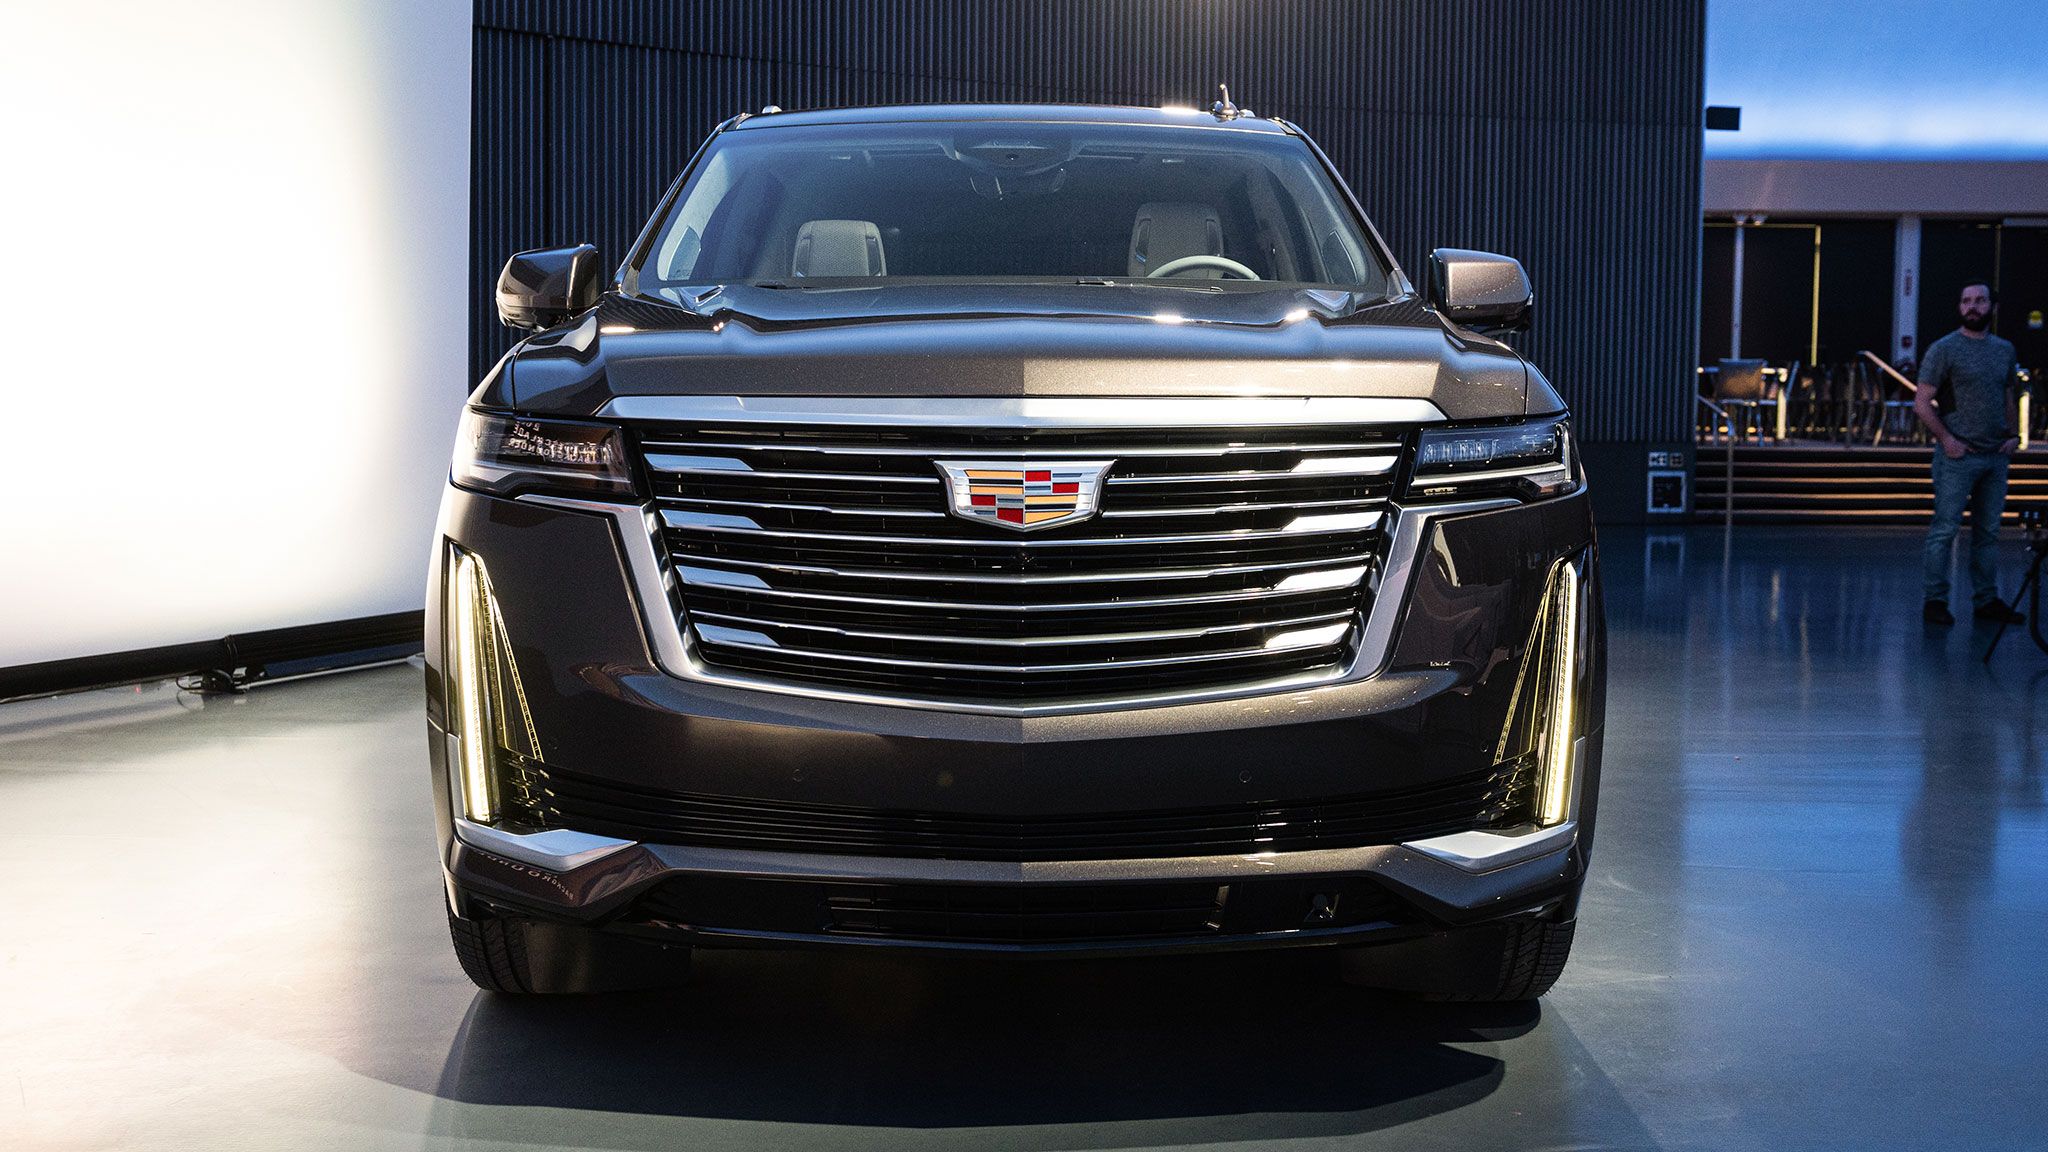 Cadillac Escalade Backstory: How an Icon Was Redesigned